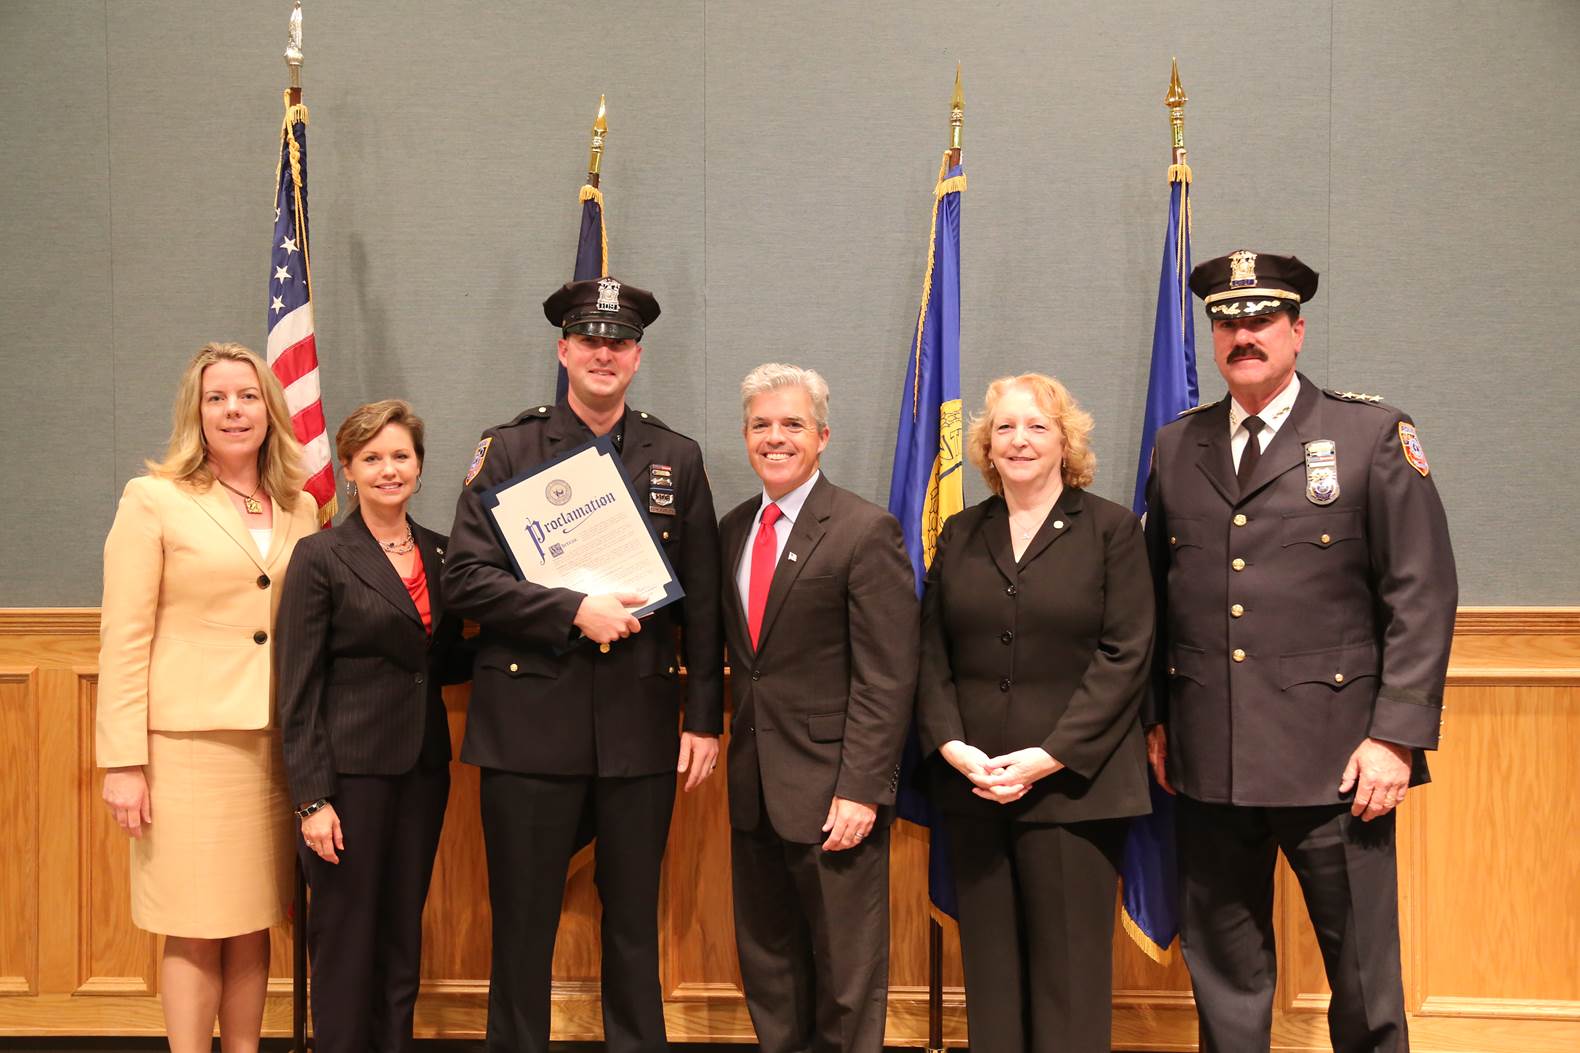 Rory Flatley (third from left) has been named a top DWI cop again. (Credit: courtesy)